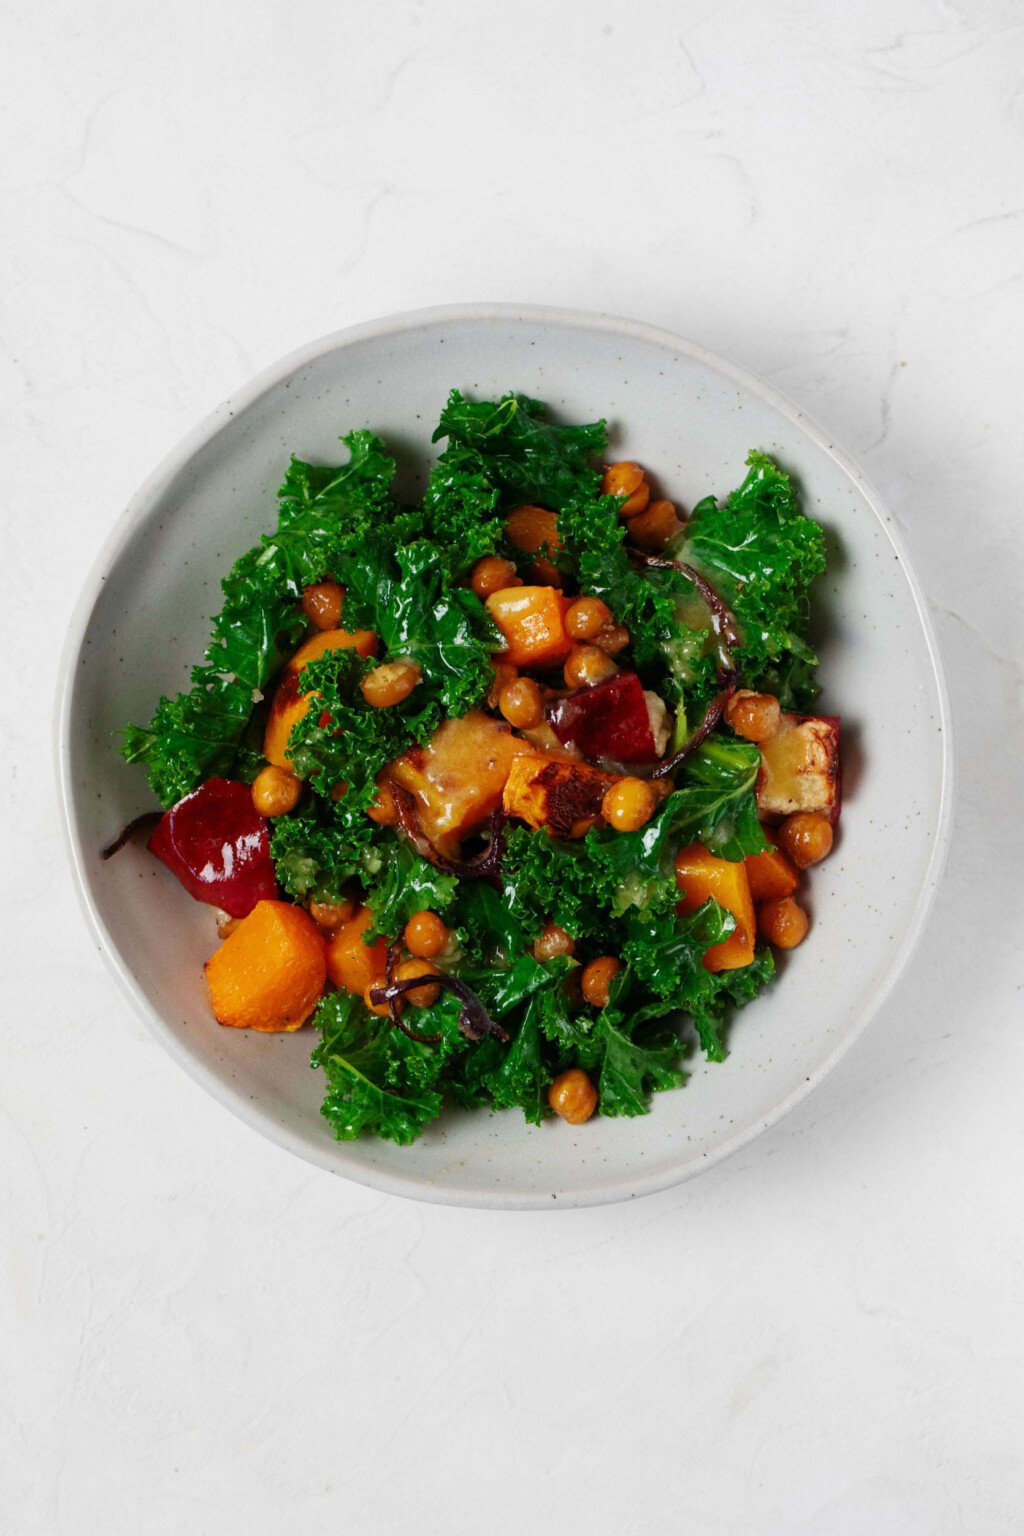 An overhead image of a white bowl, which is filled with kale, squash, and other ingredients.